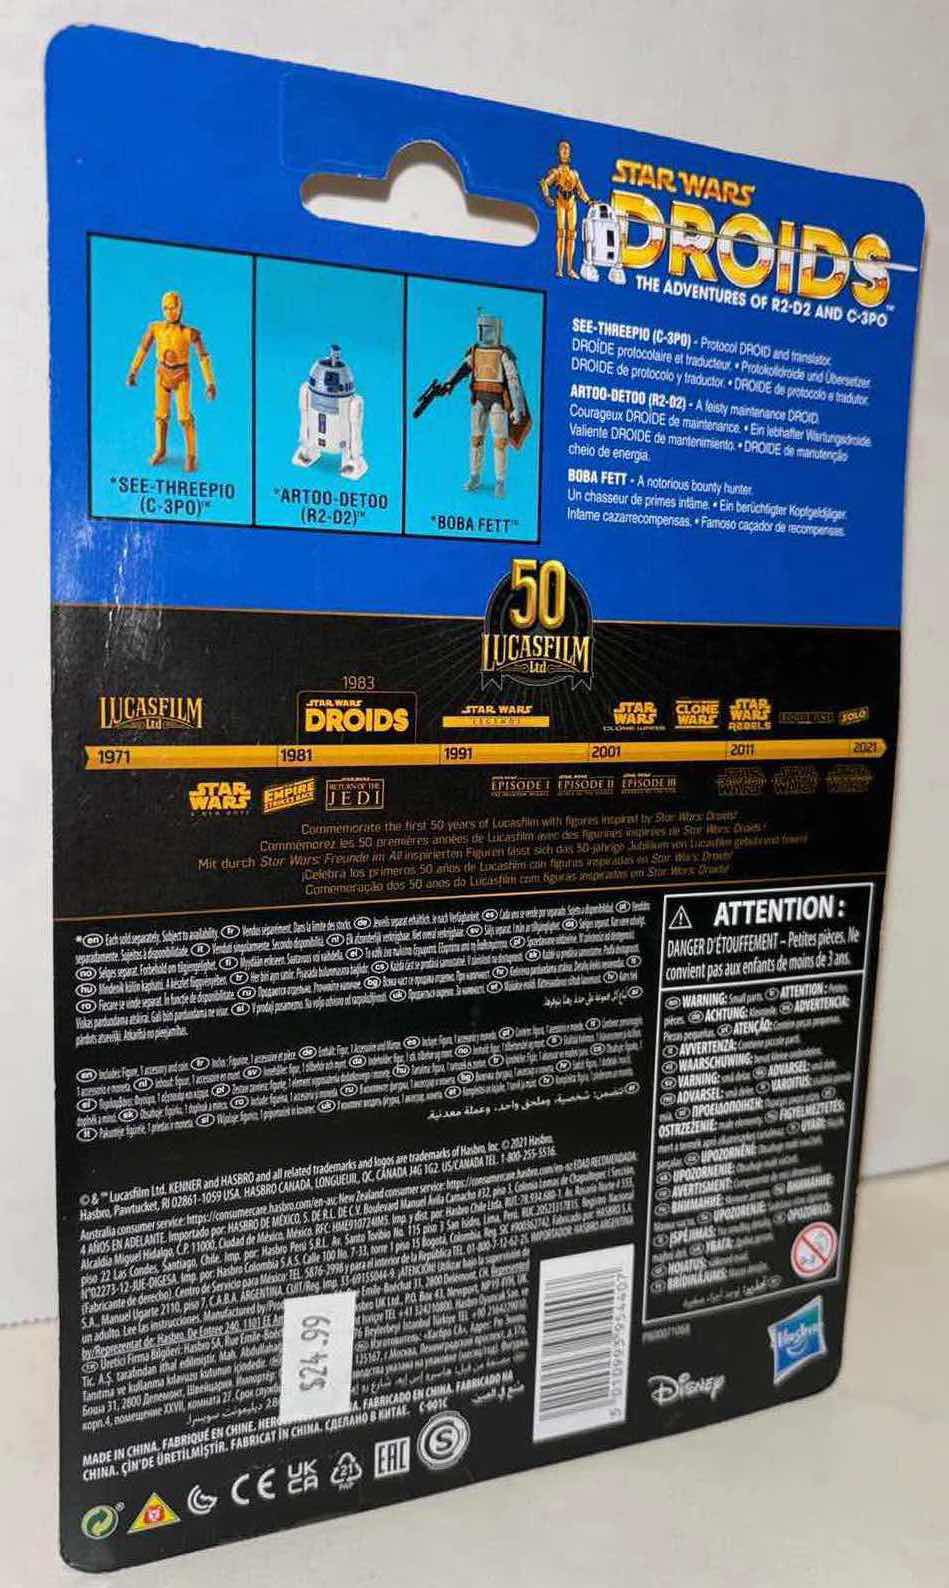 Photo 4 of NEW 2021 HASBRO KENNER 50TH ANNIVERSARY LUCAS FILM STAR WARS DROIDS THE ADVENTURE OF R2-D2 & C-3PO, “ARTOO-DETOO R2-D2” W COIN